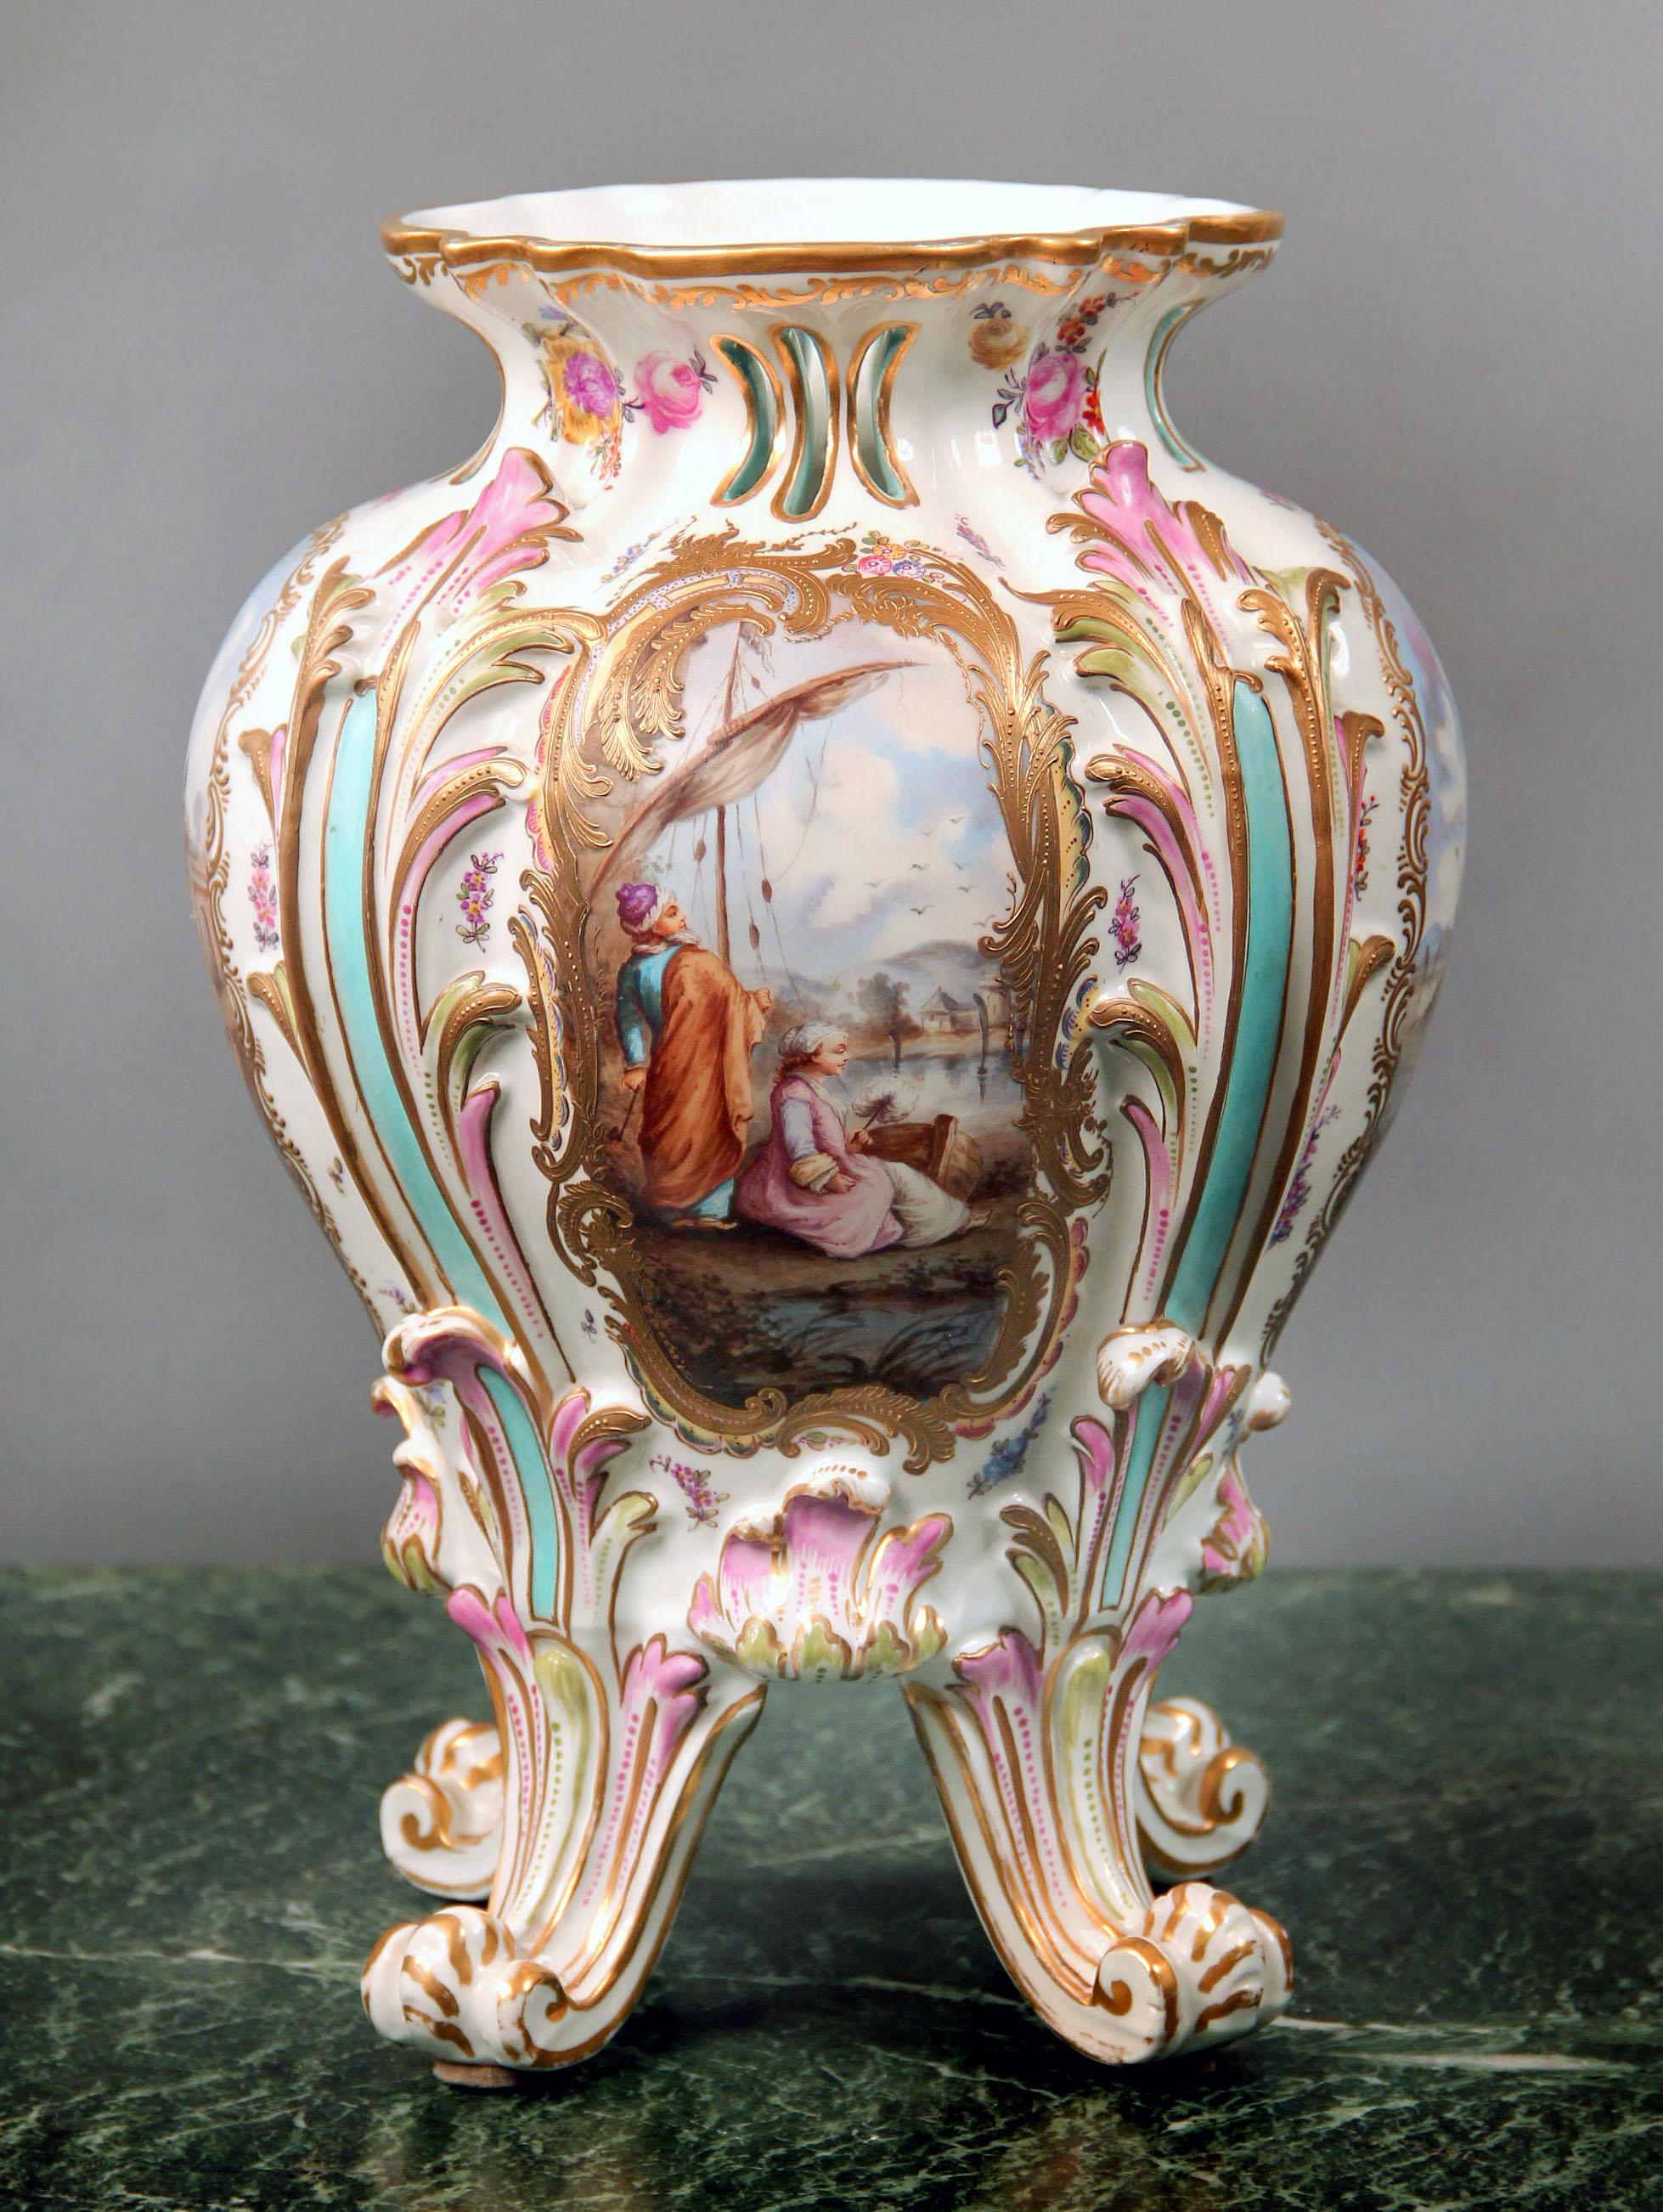 A Pretty Late 19th Century German Porcelain Vase

Four individual water scenes within raised gilt borders, the main scene is of a couple resting and looking towards the water.